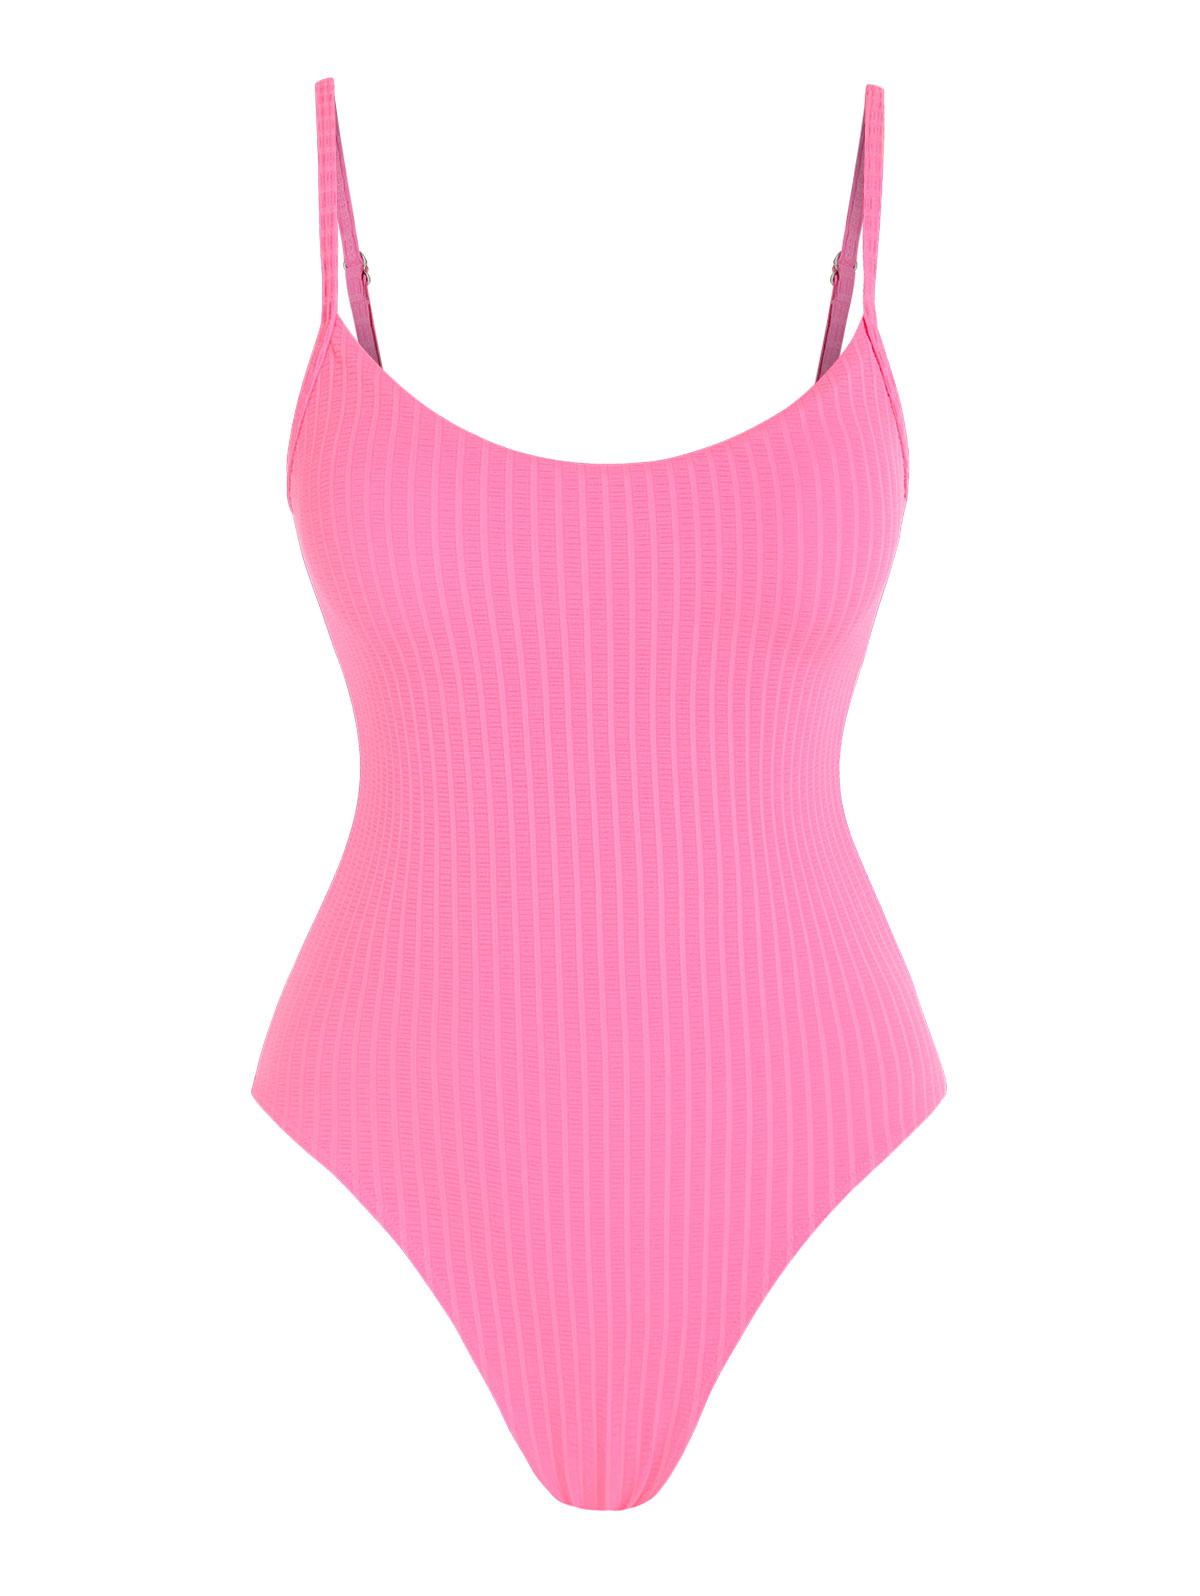 ZAFUL Strappy Open Back Rib Textured One-piece Swimsuit M Light pink